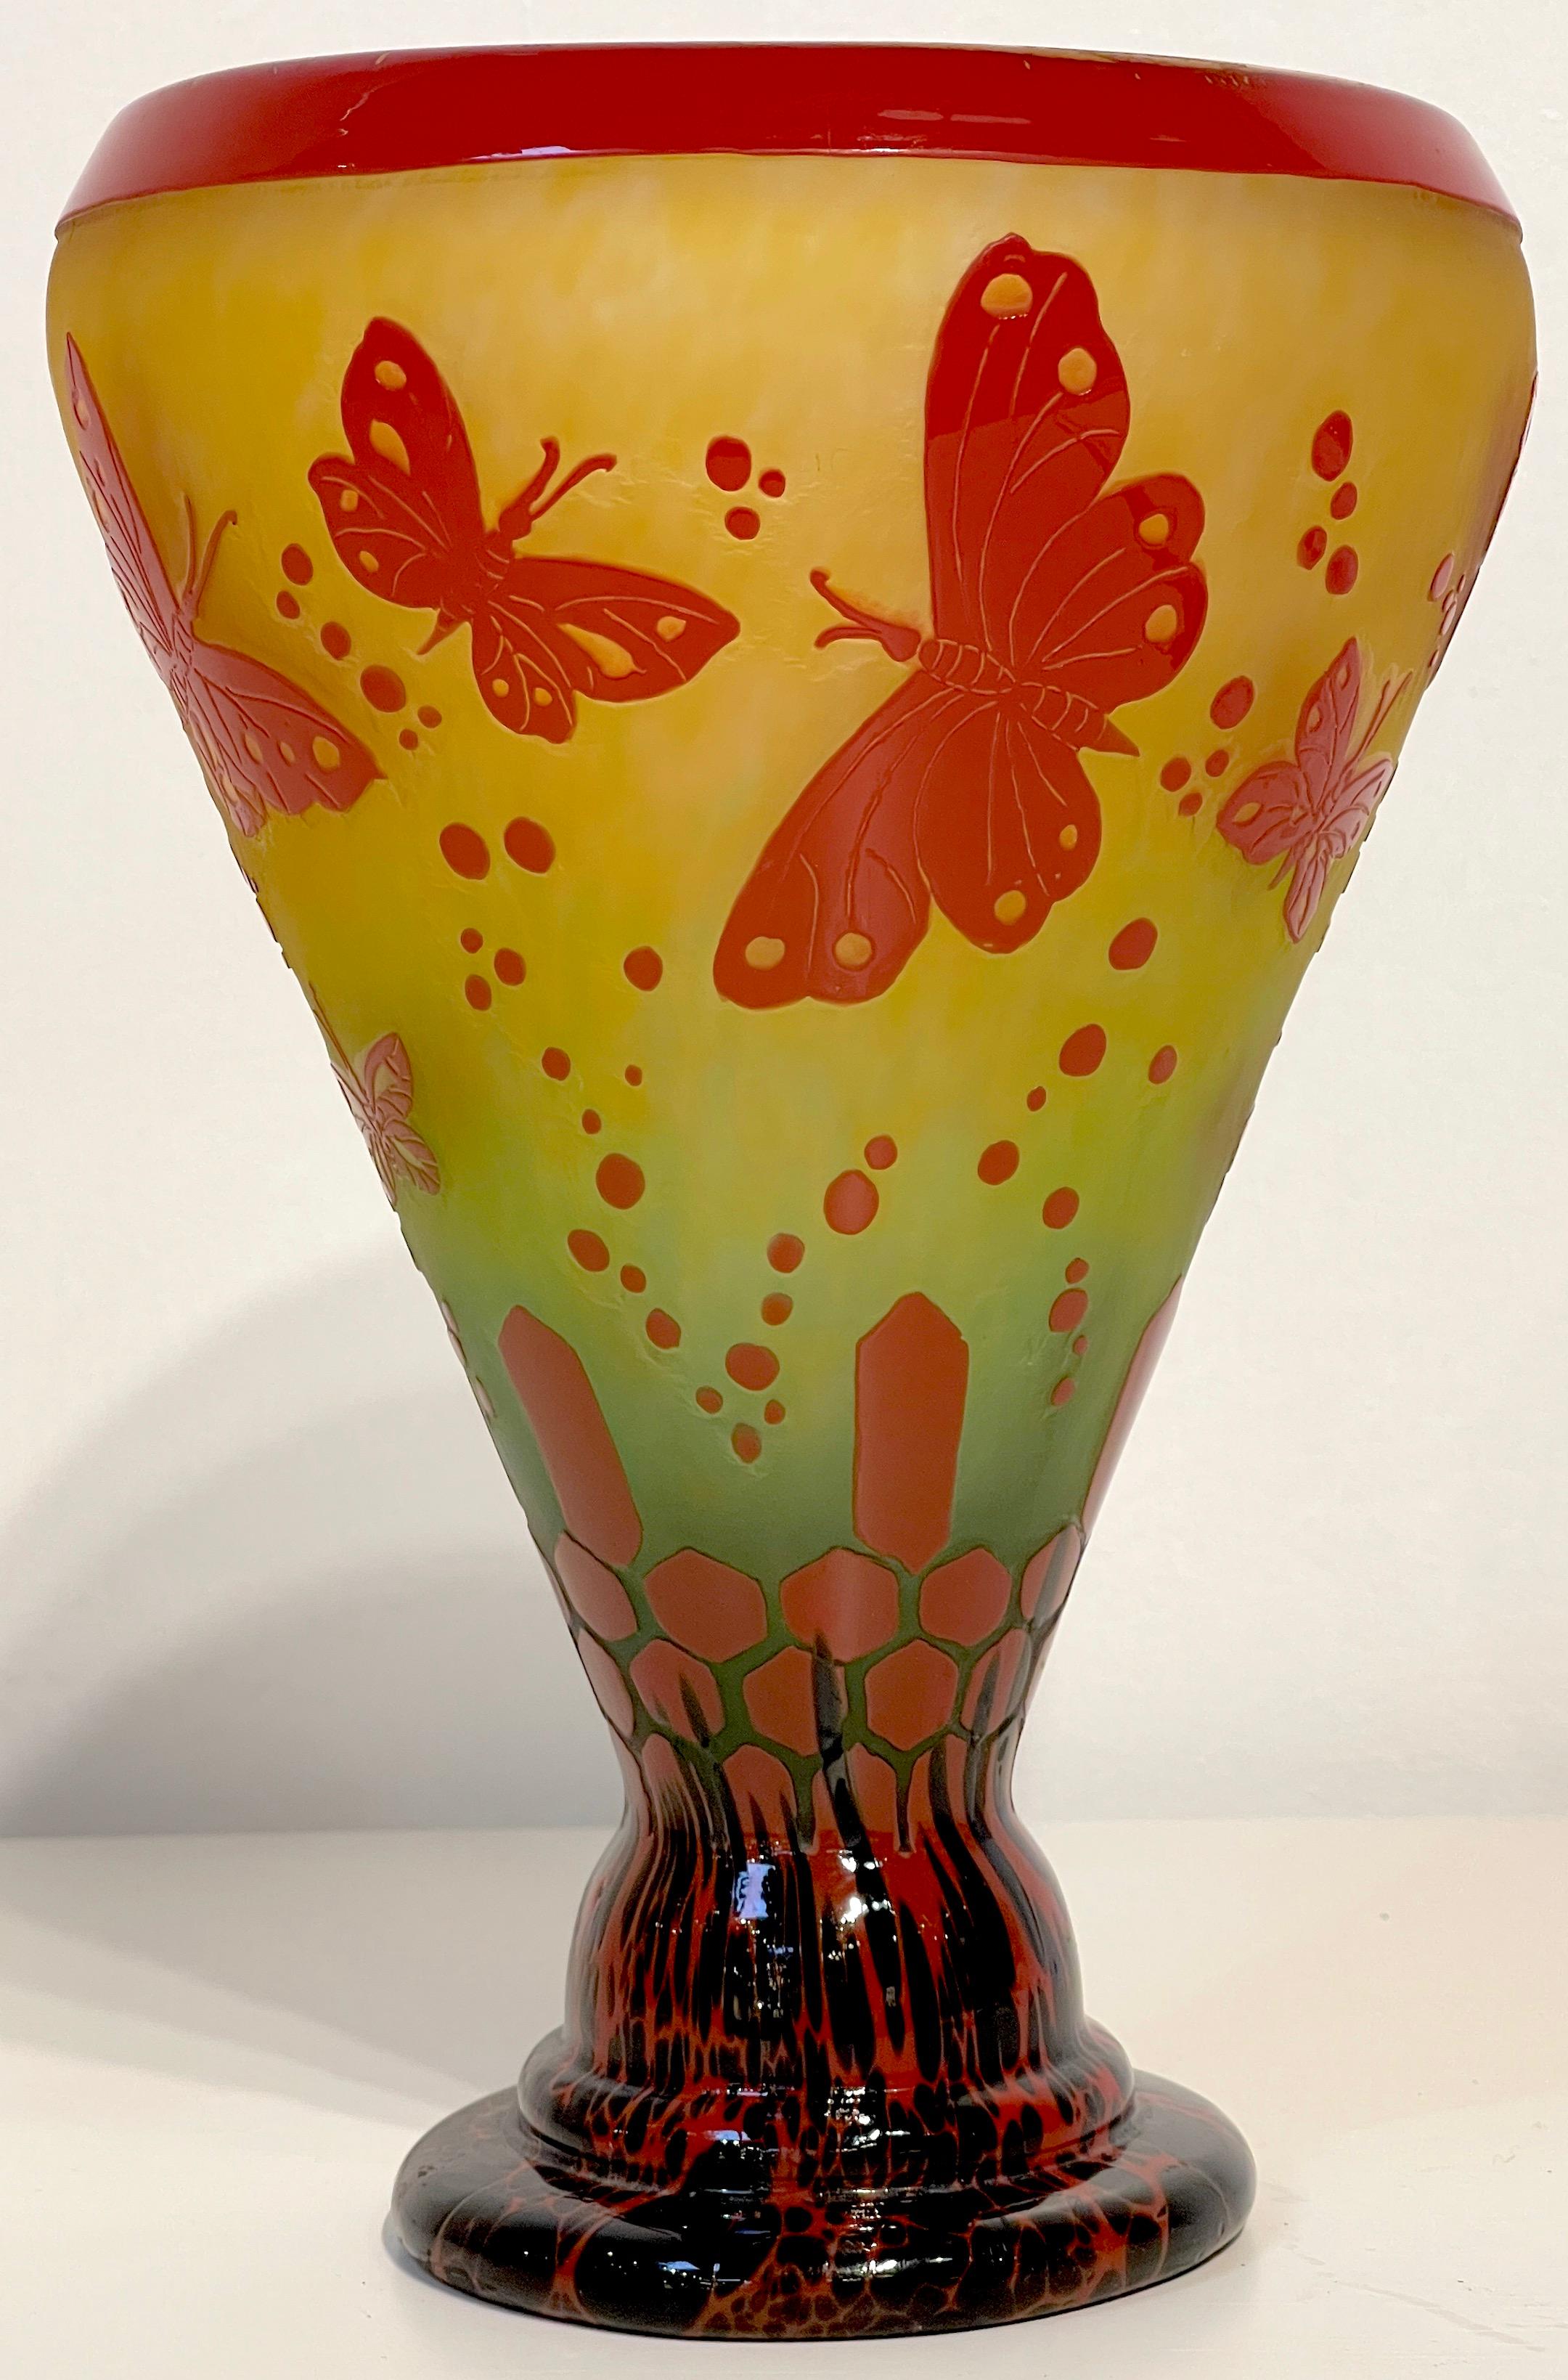 Le Verre Francais 'Papillons' French Cameo Art Glass vase
Charles Schneider Glassworks, Épinay-sur-Seine, France. 

The name 'Le Verre Francais' was used by the Schneiders for multi- layered cameo glass, in a combined Art Nouveau and Art Deco